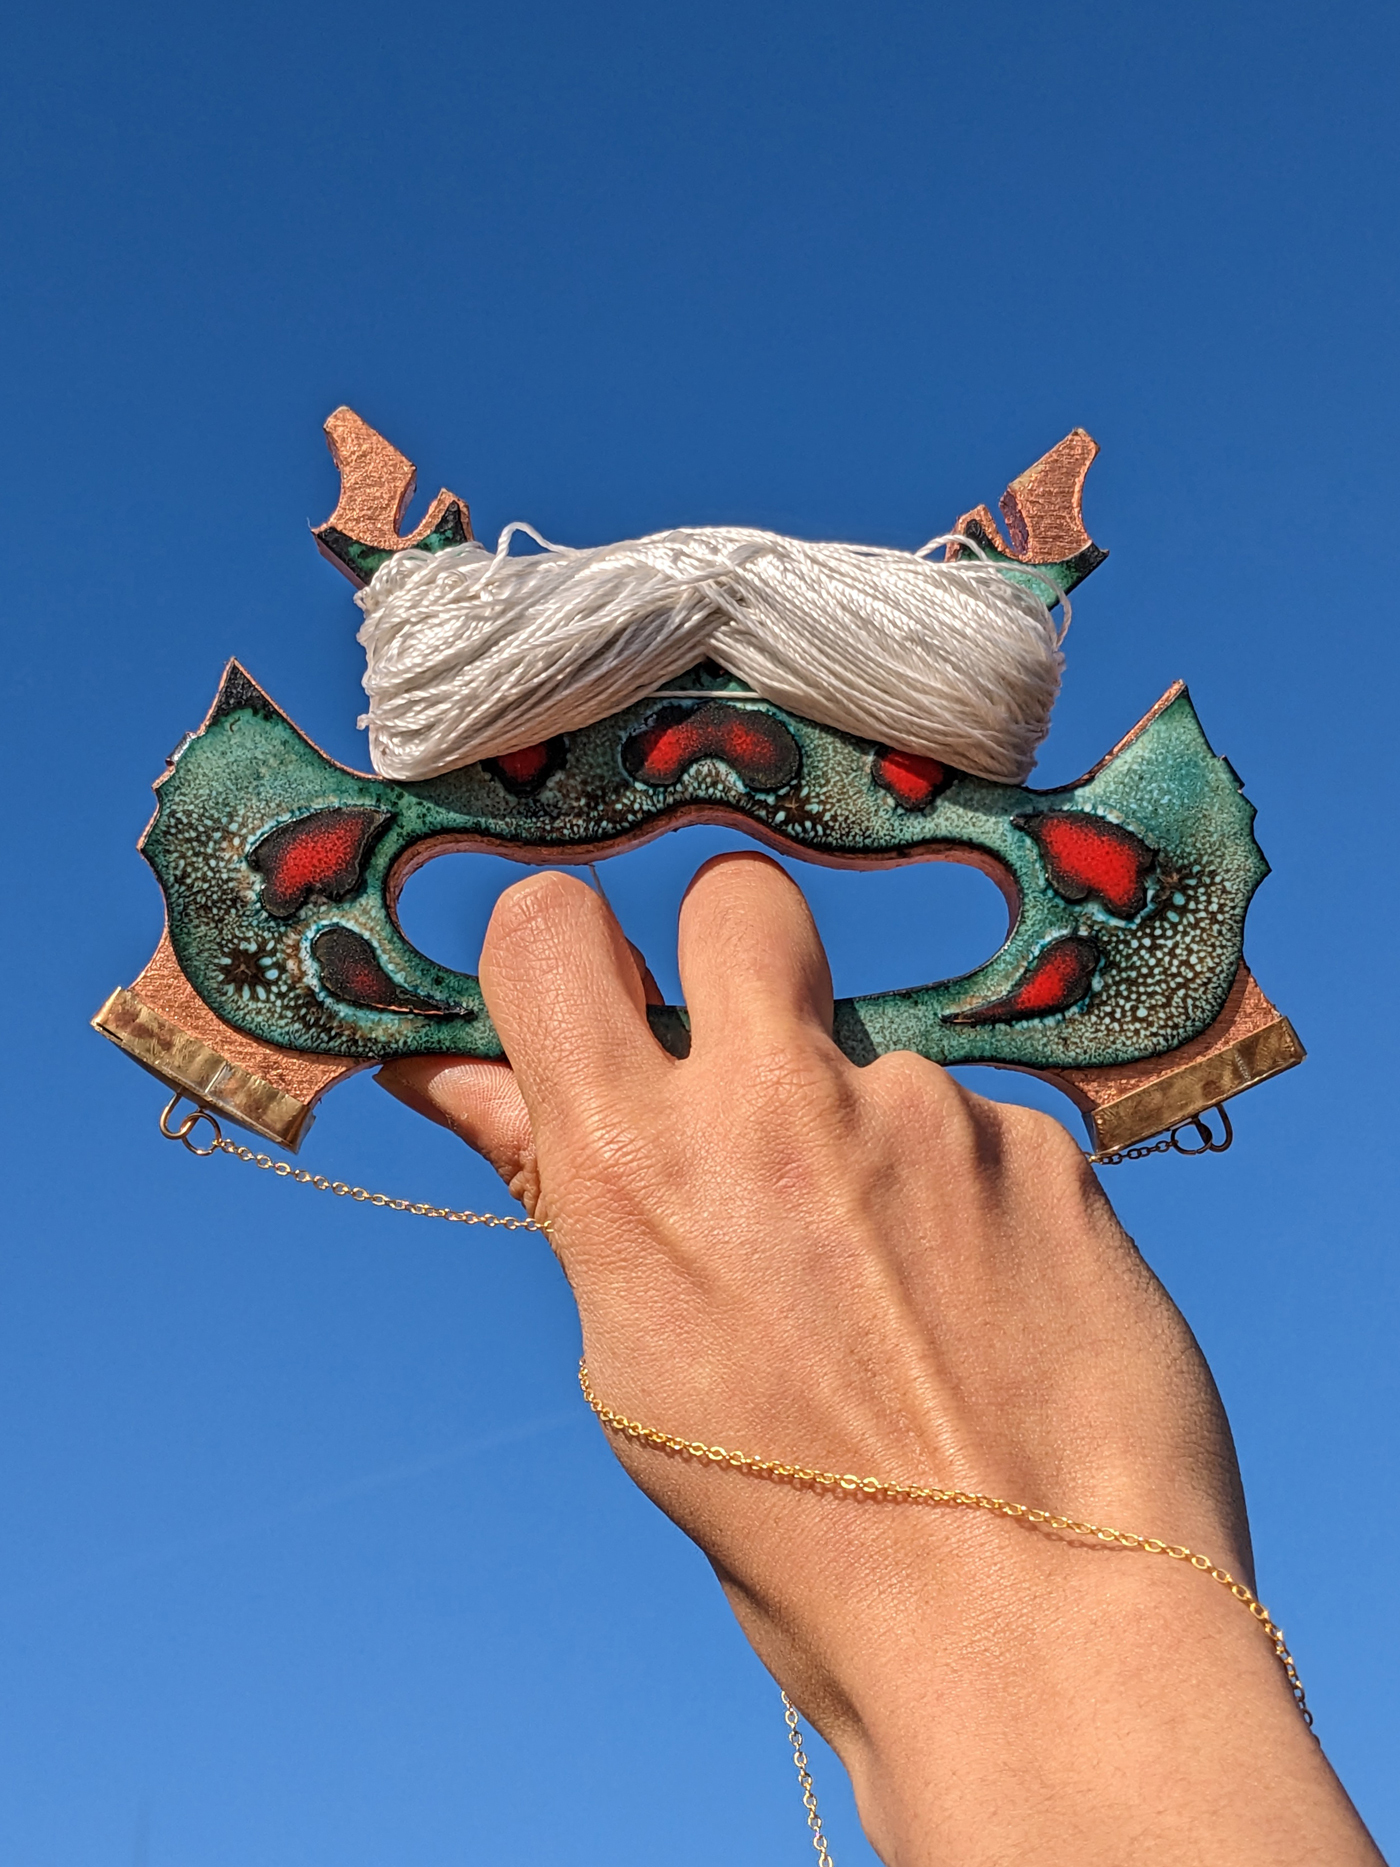 a hand holding a kite reel made of copper leafed wood with an enameled copper plate